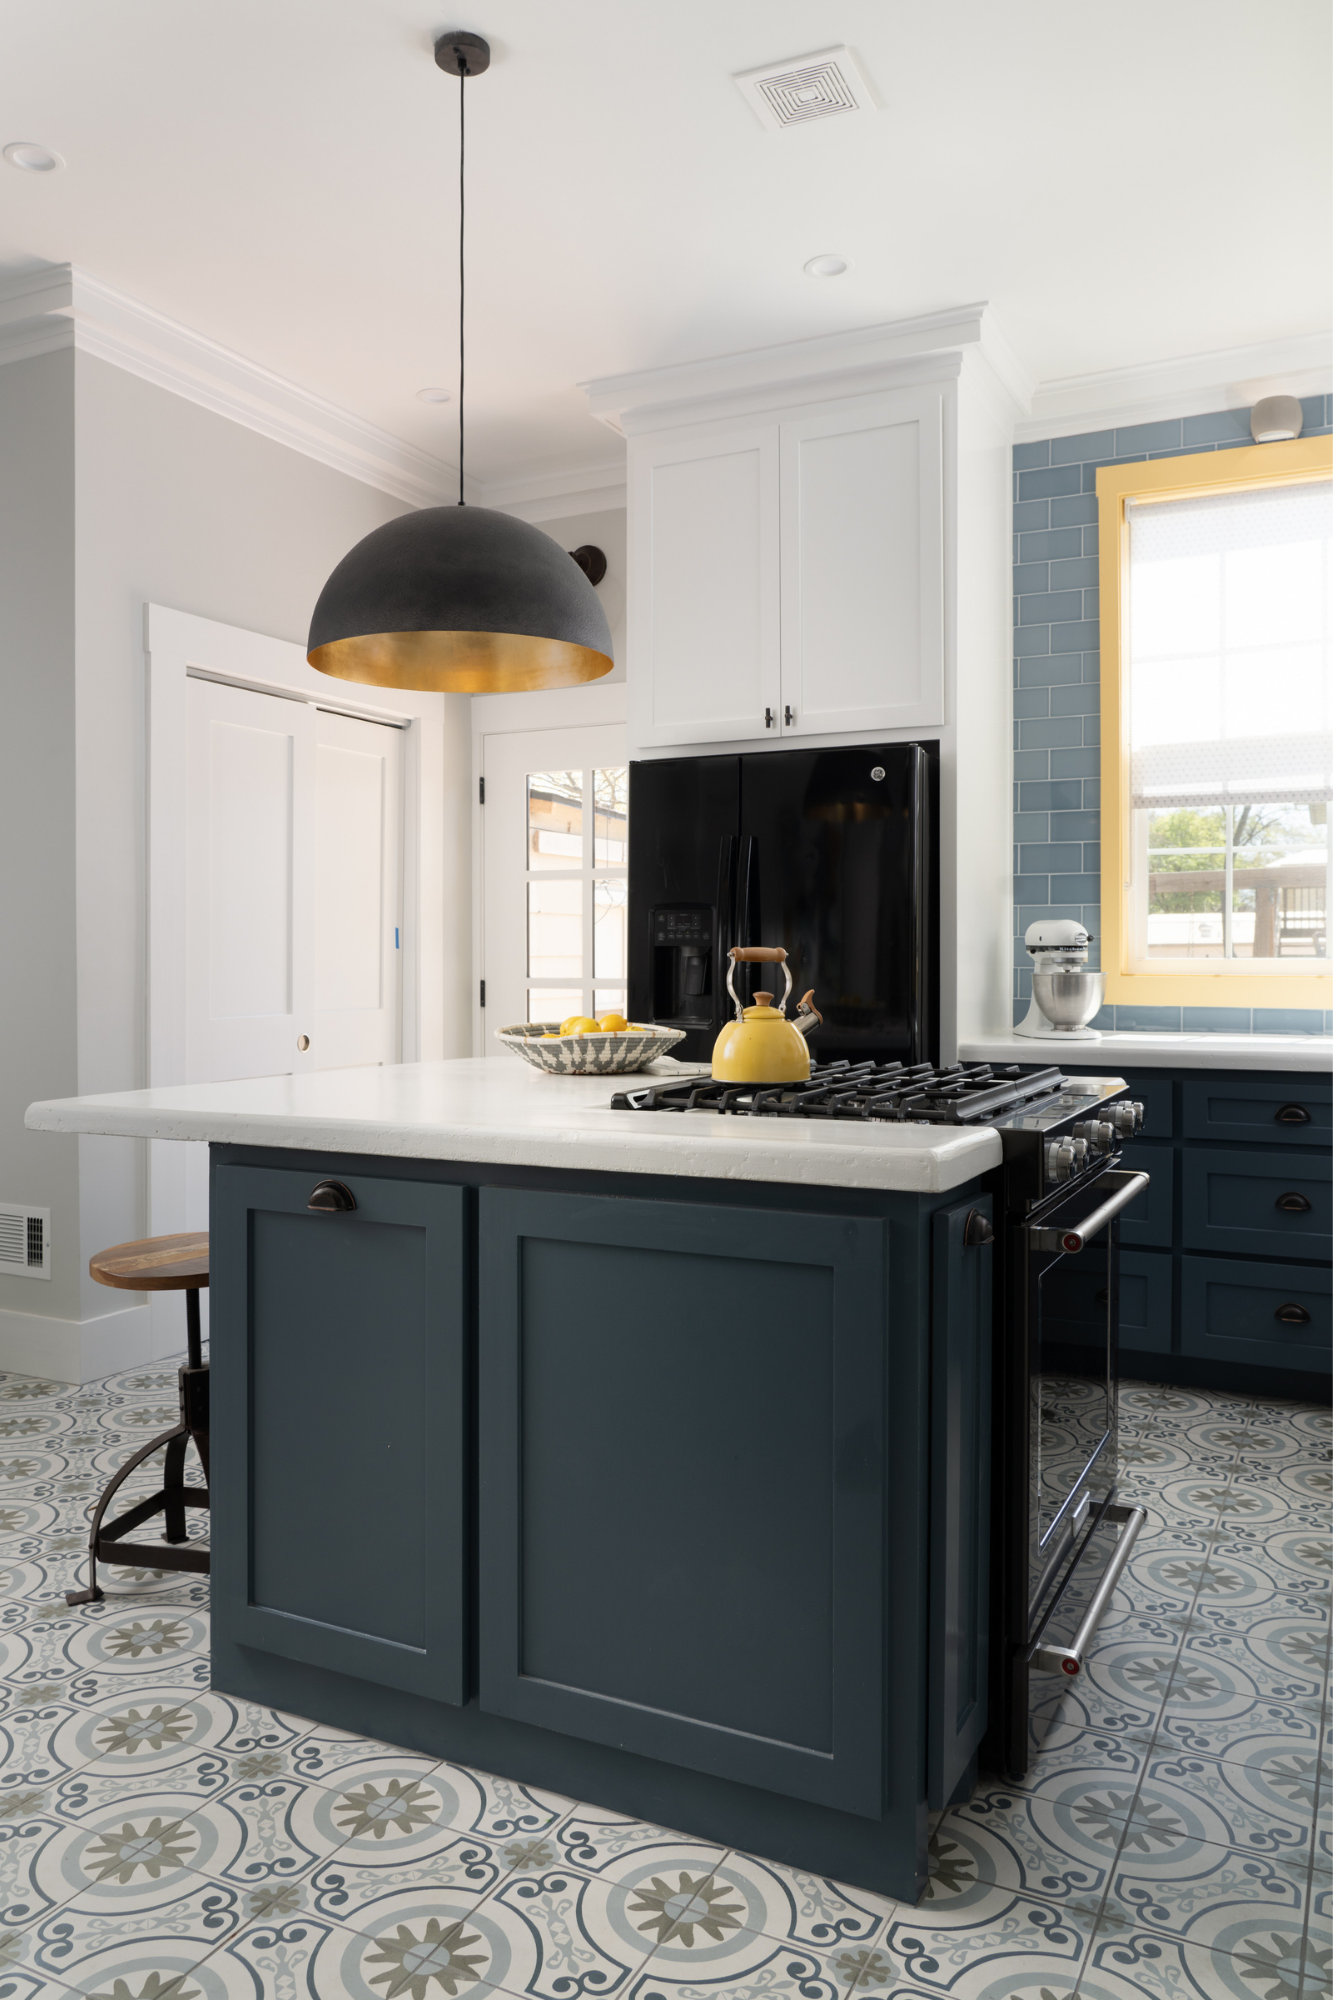 A dramatic oversize black and brass pendant is the centerpiece in this historic blue kitchen remodel by interior designer Lesley Myrick.